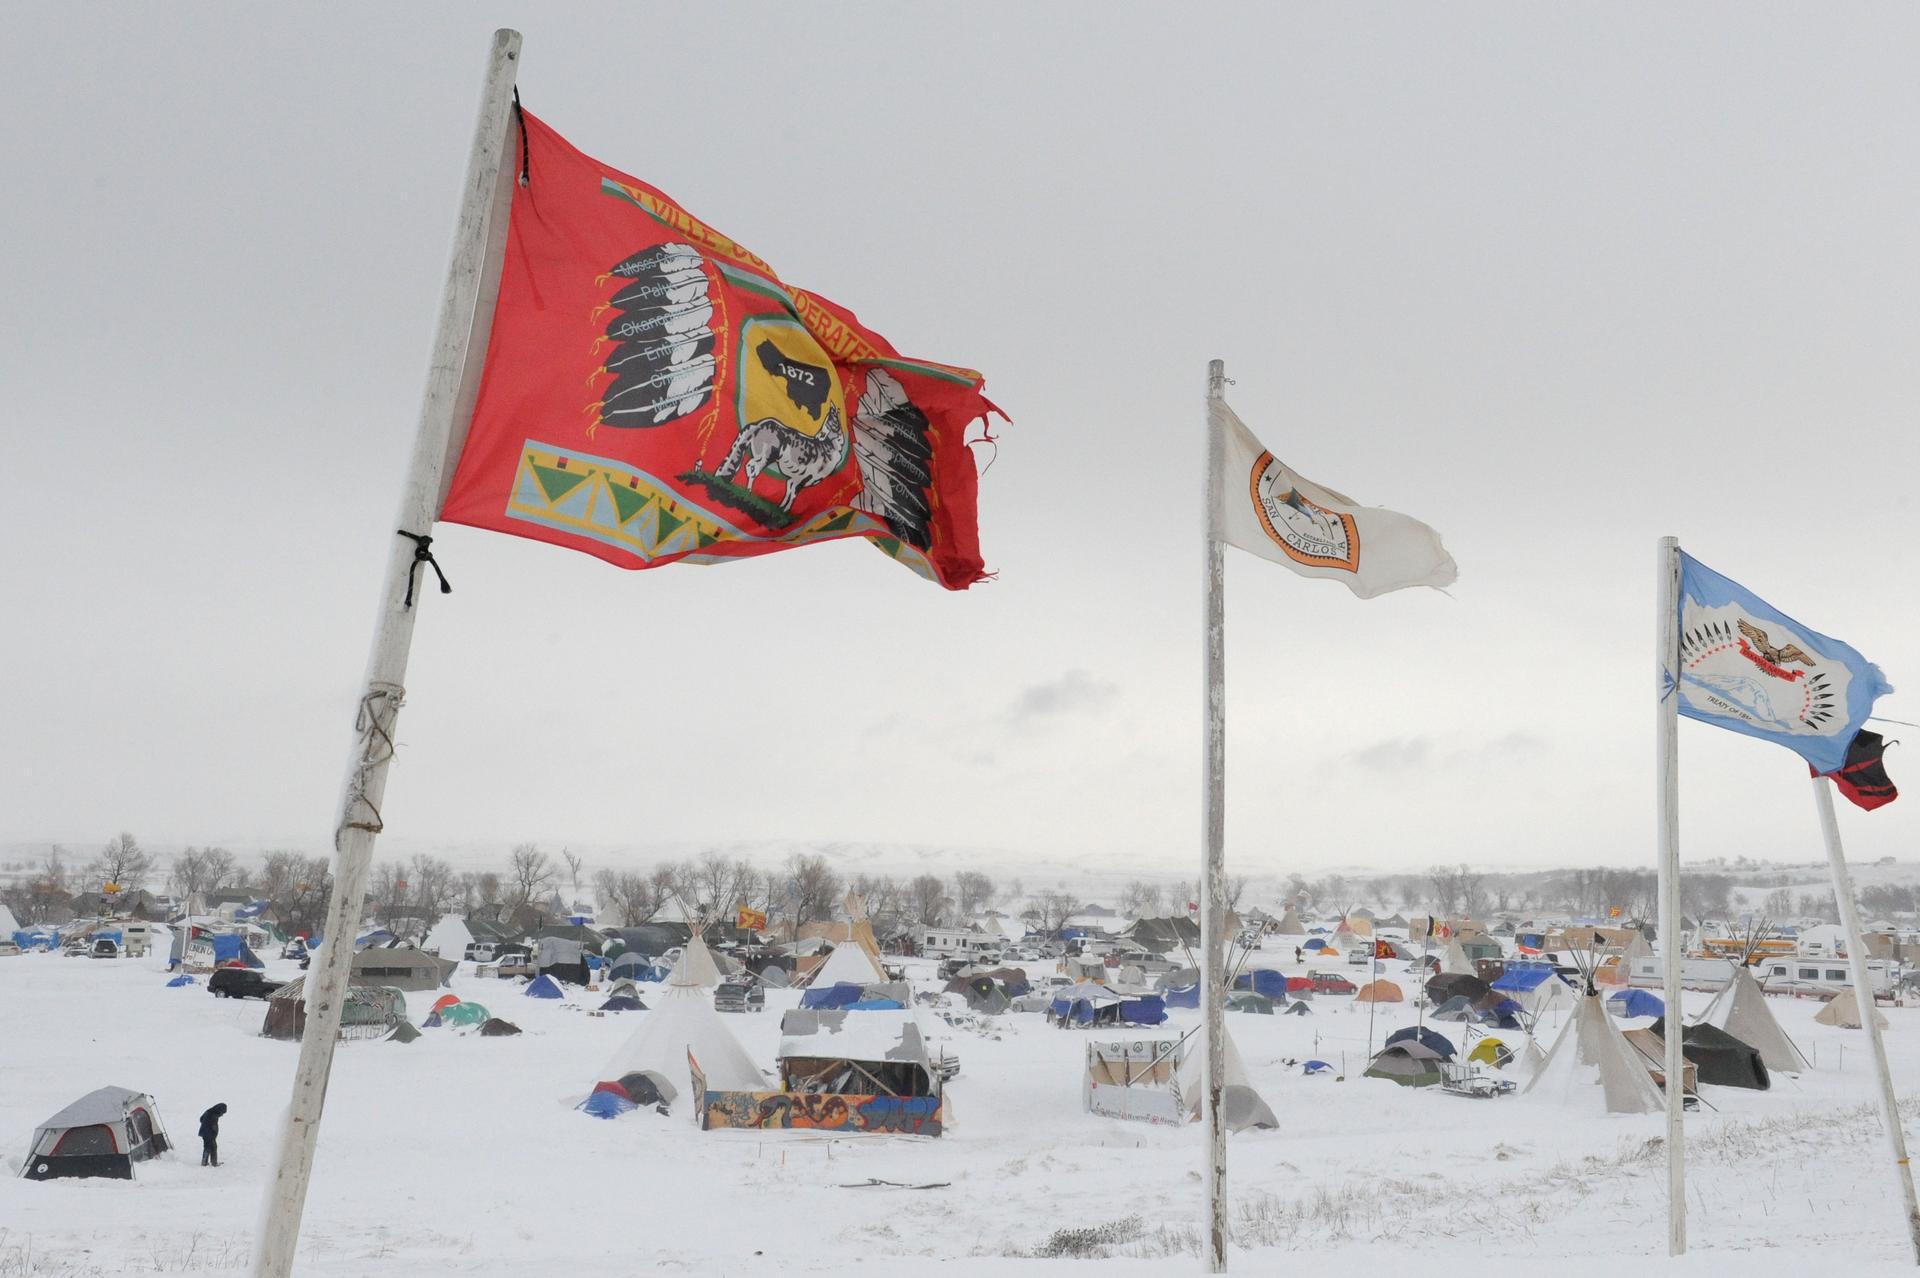 The Oceti Sakowin camp is seen in a snow storm